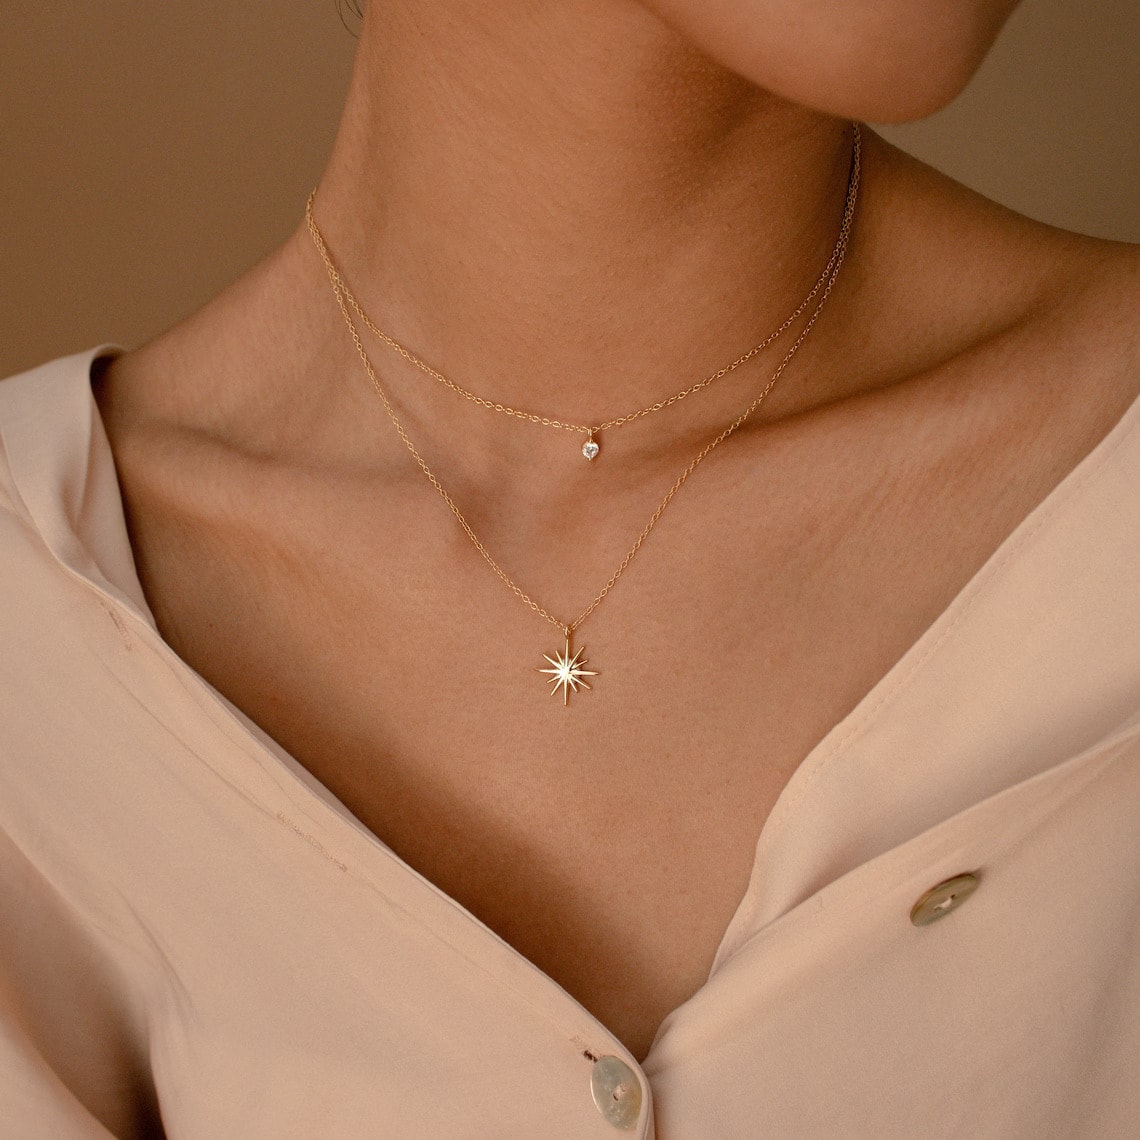 gold plated starburst necklace on the woman's neck